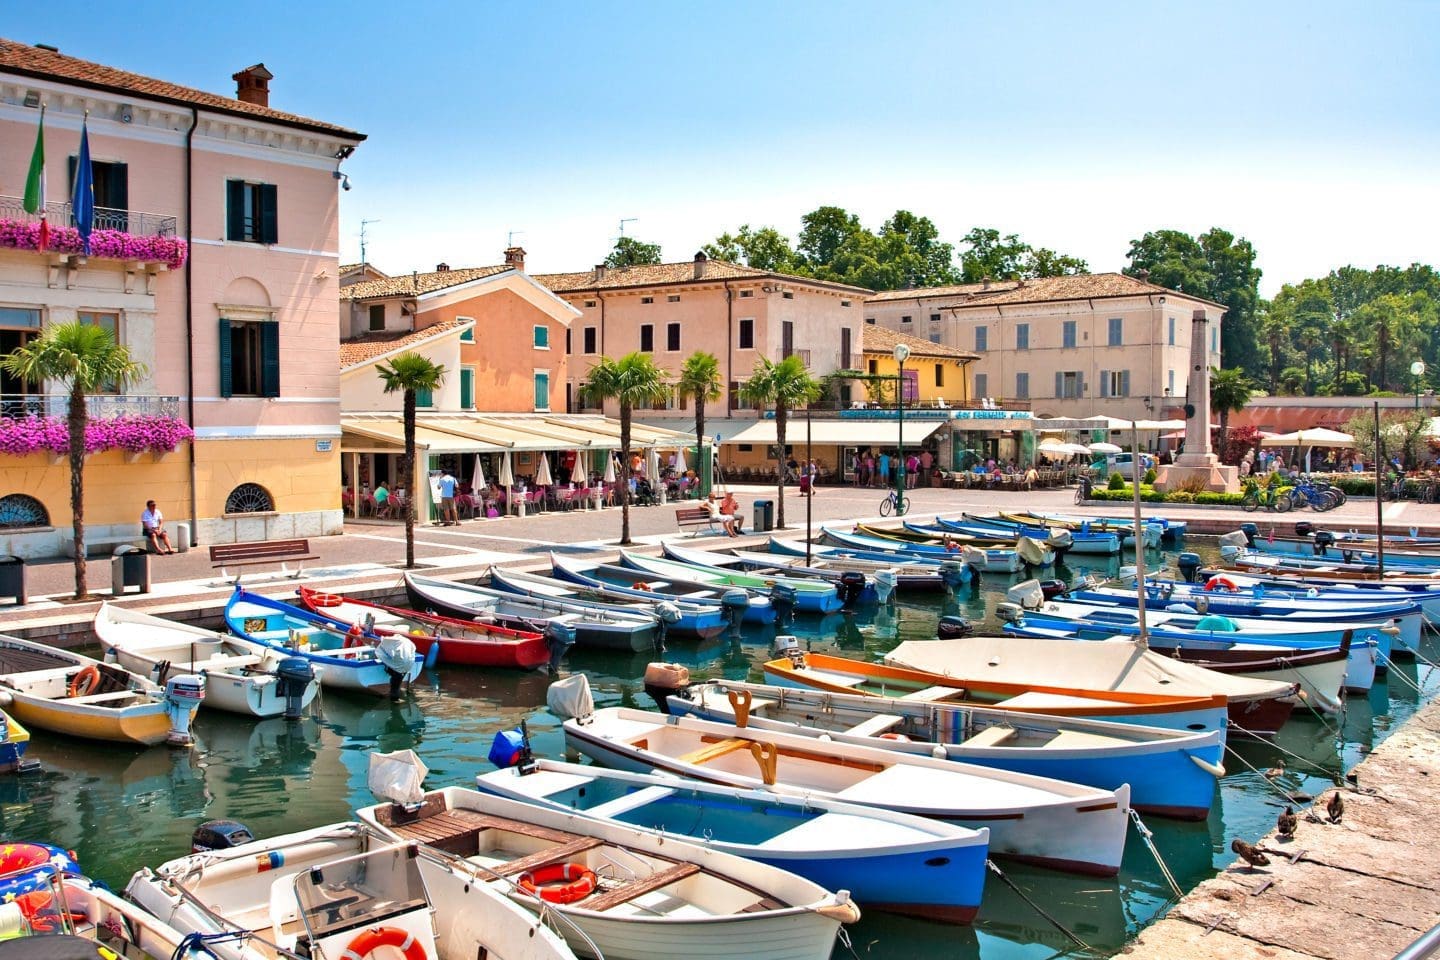 What to do in Bardolino - where to stay, to eat and hidden gems